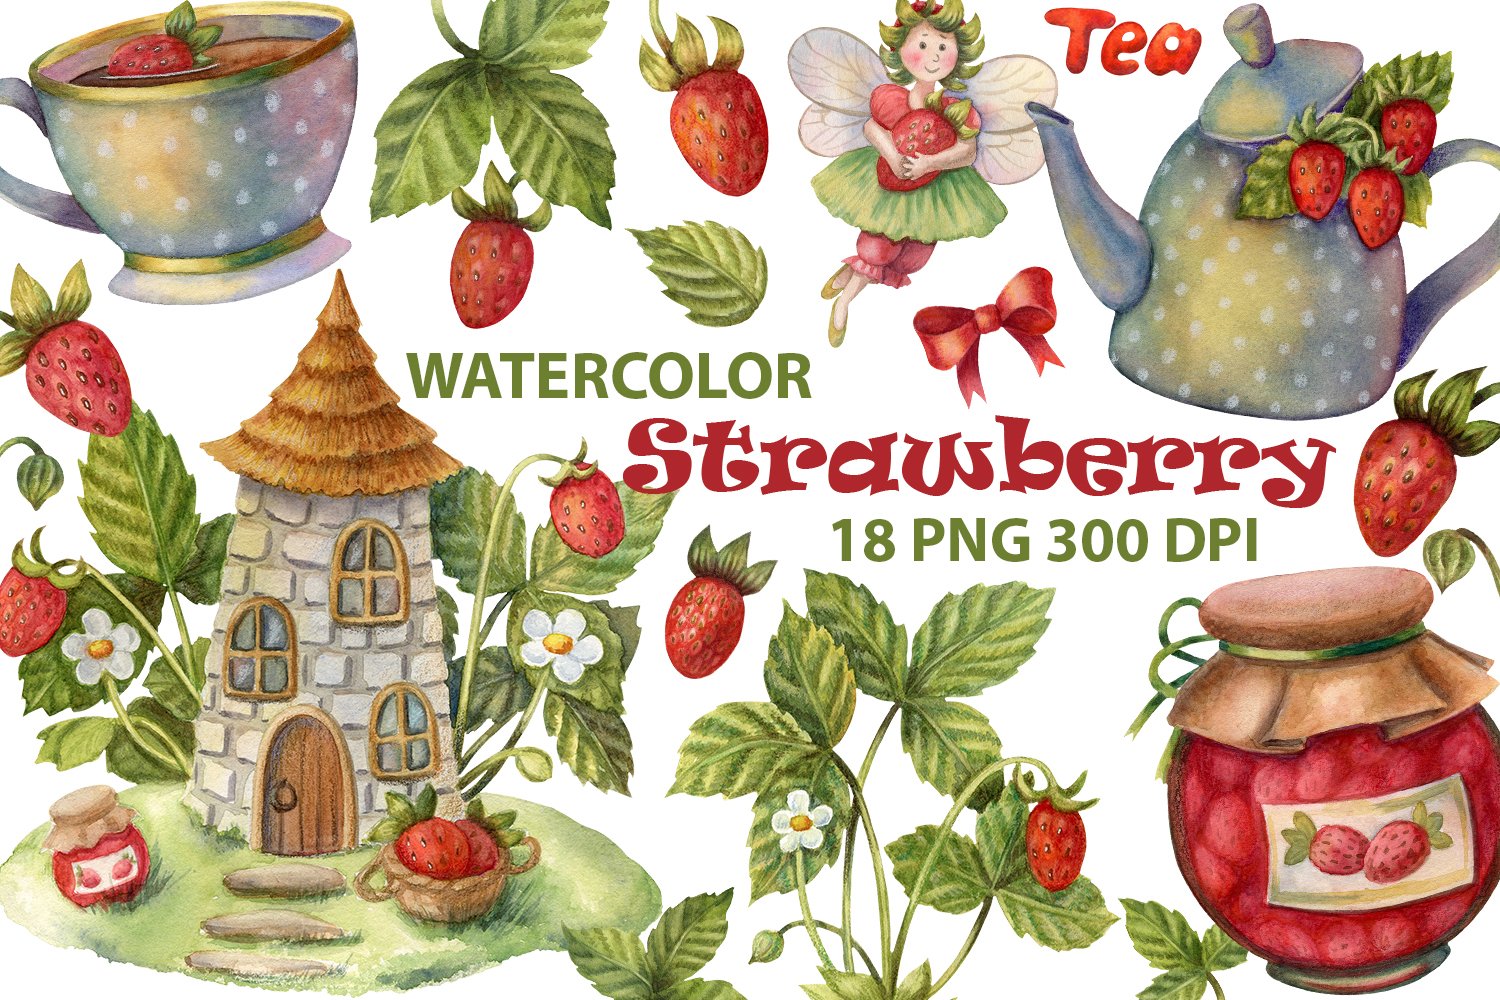 Green-red lettering "Watercolor Strawberry" and different watercolor illustrations with strawberry.